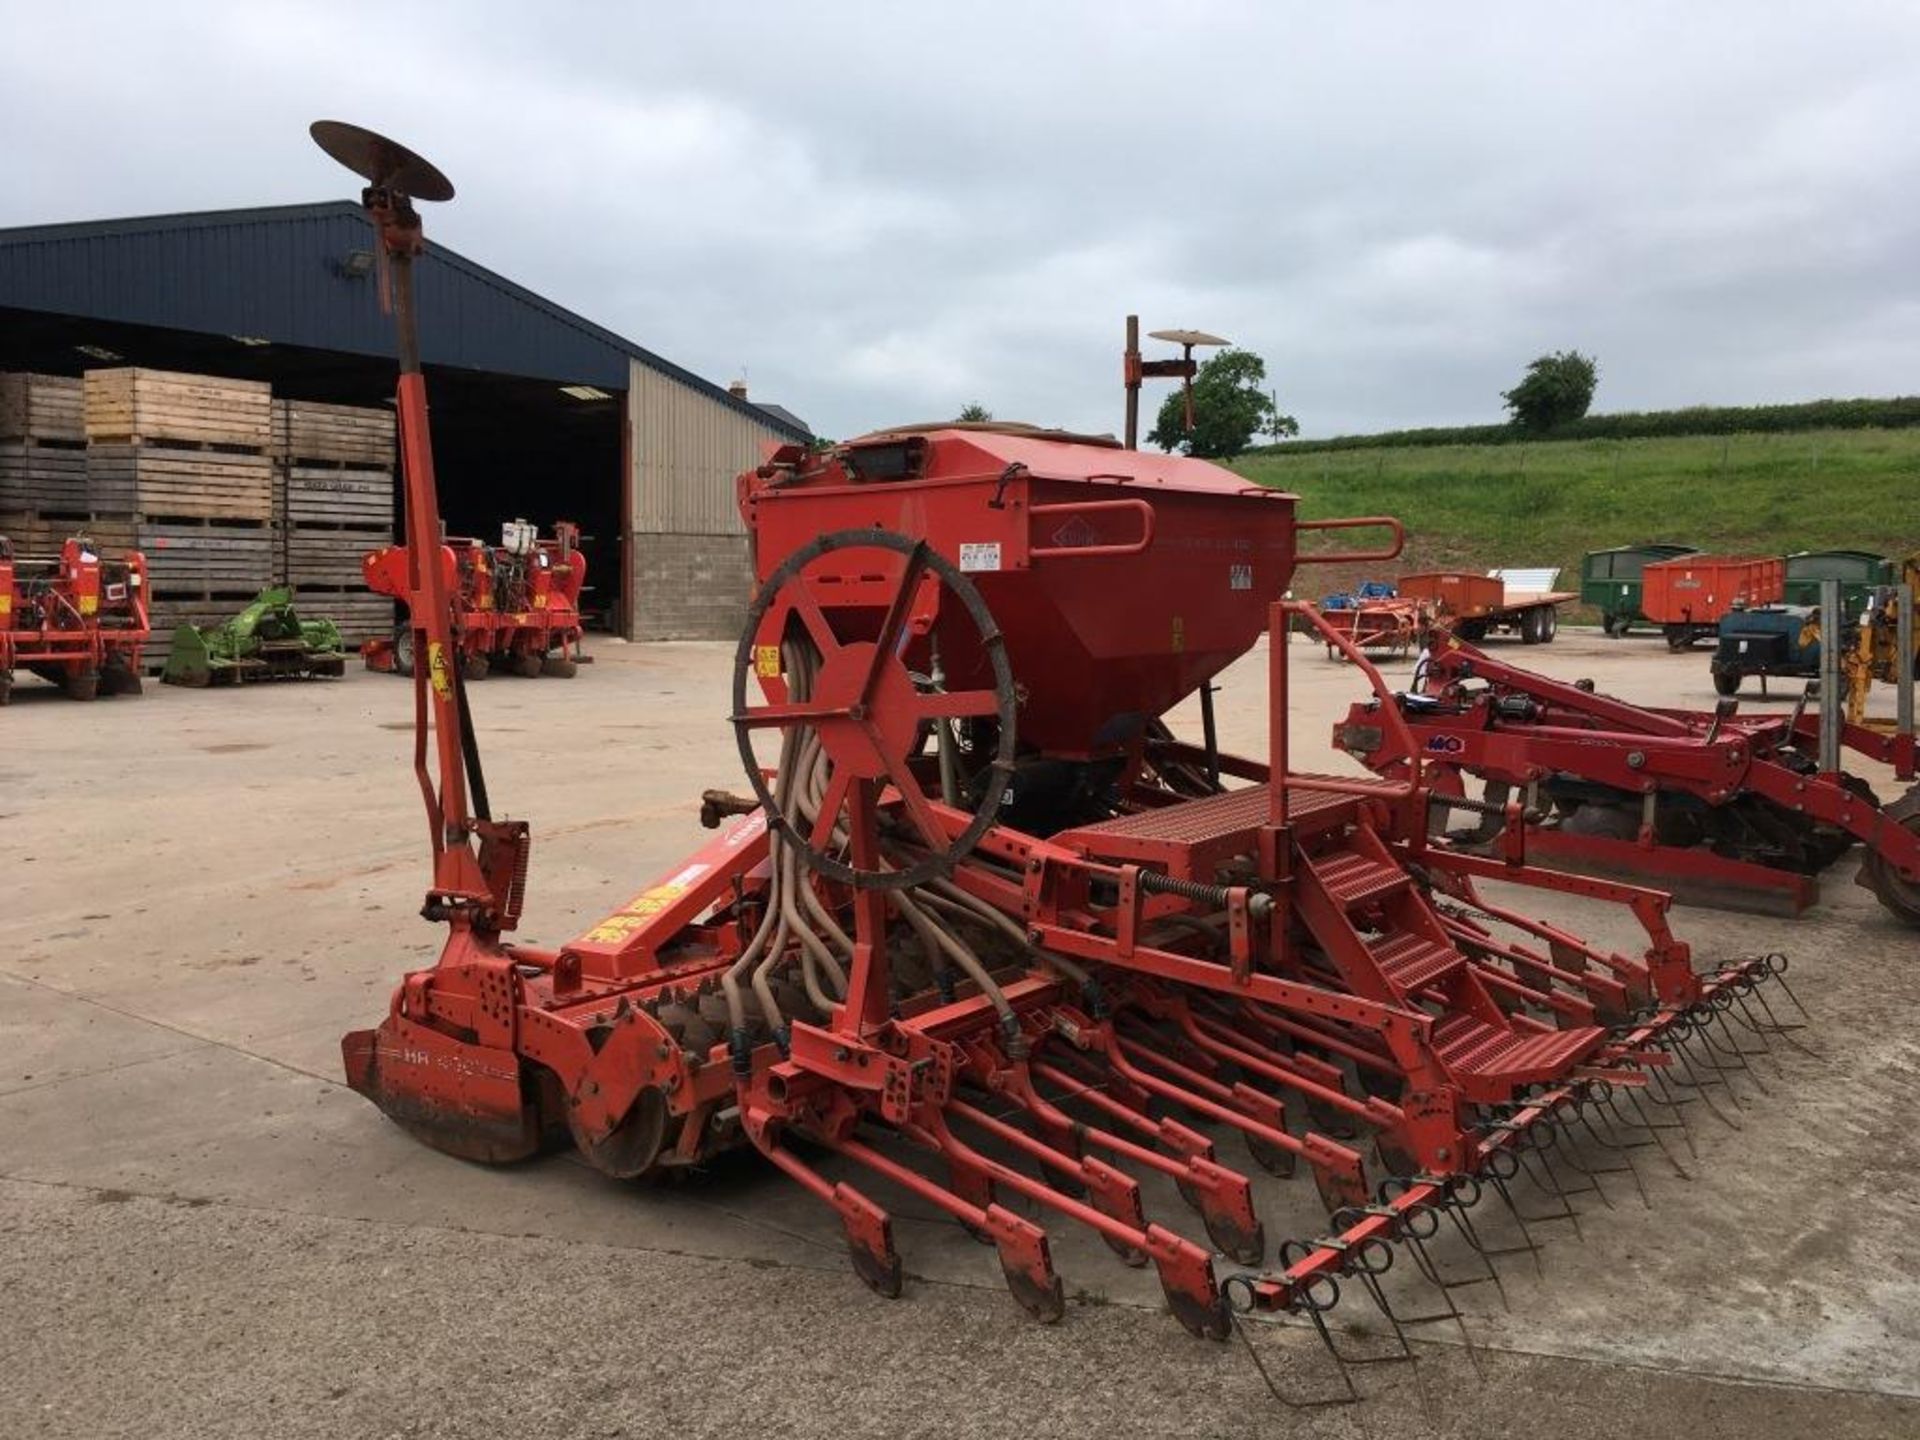 Kuhn HR 4003D 14' power harrow, serial number: A4631 (2002) with Kuhn Venta LC 402 seed drill, - Bild 3 aus 15